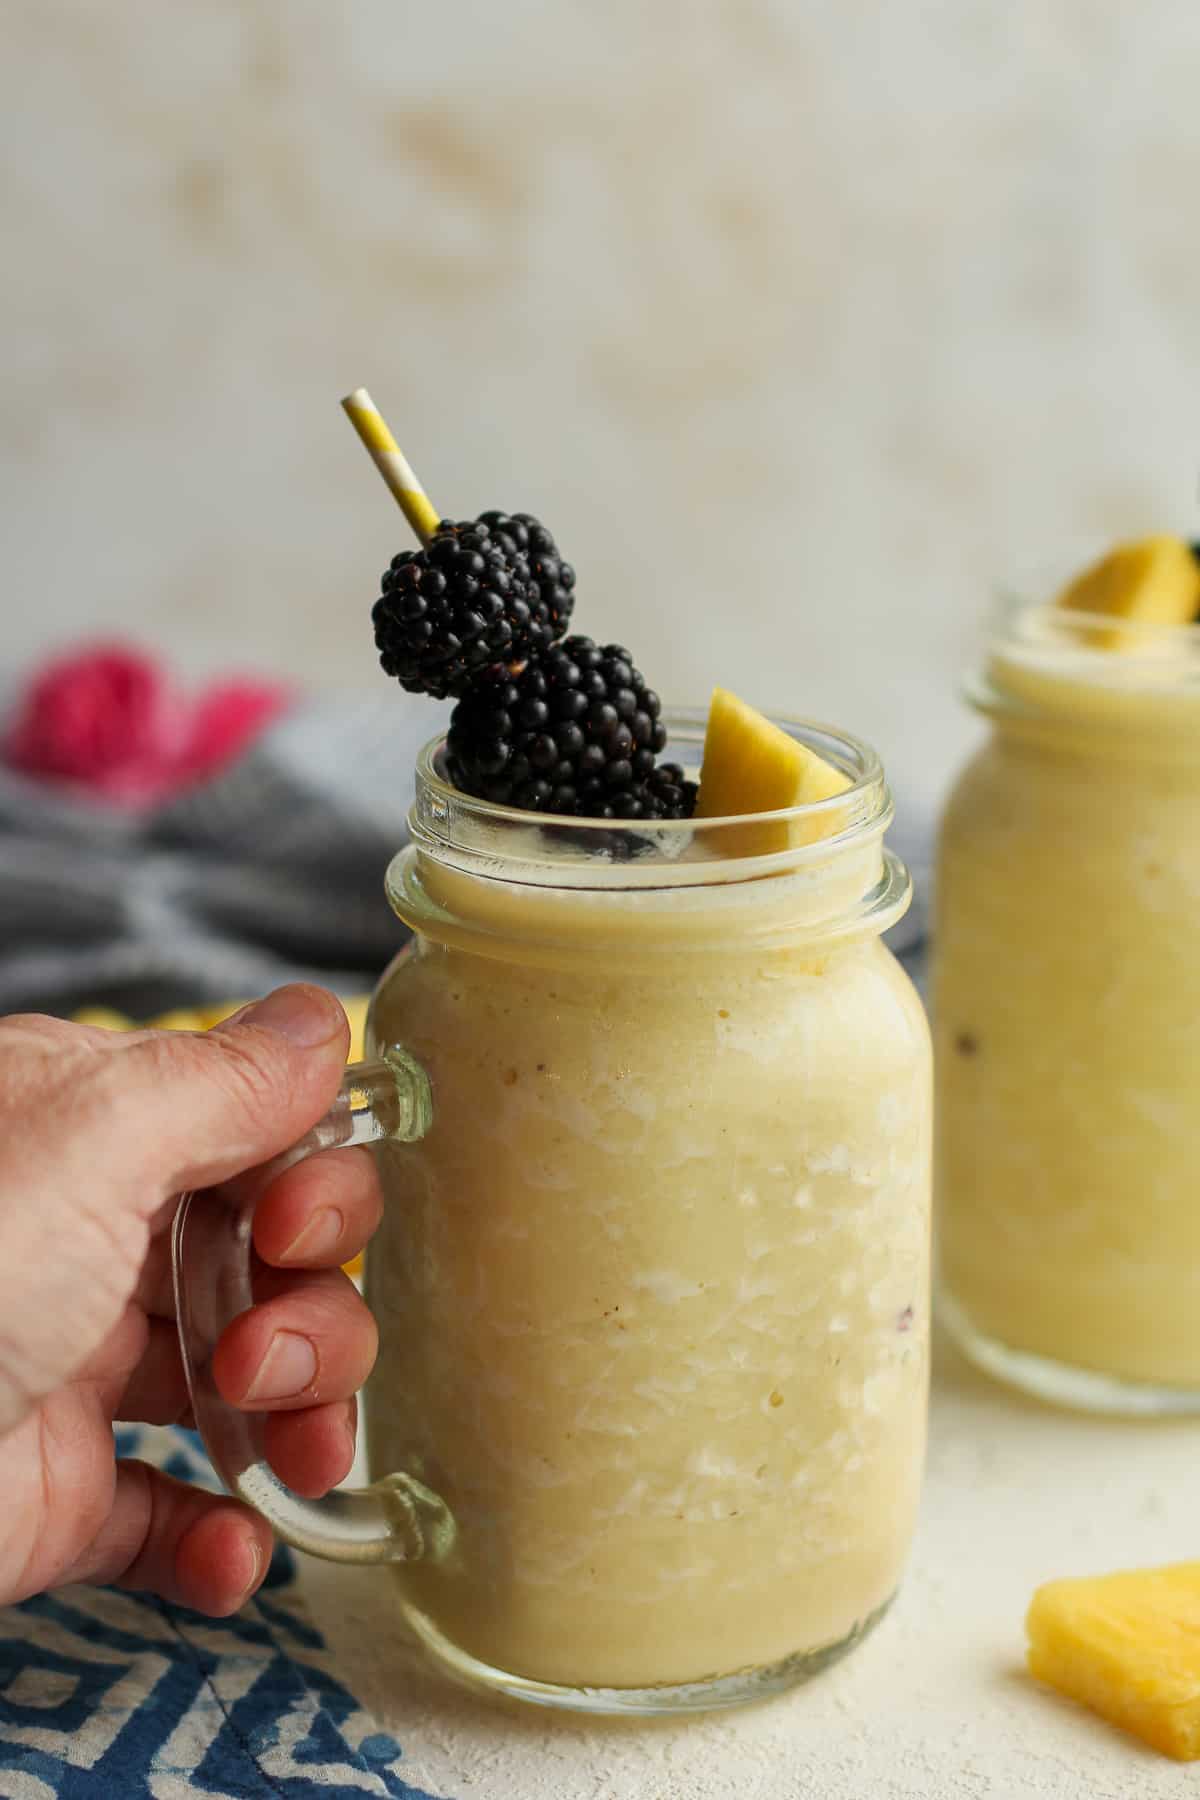 My hand on the pineapple banana smoothie with blackberry garnish.